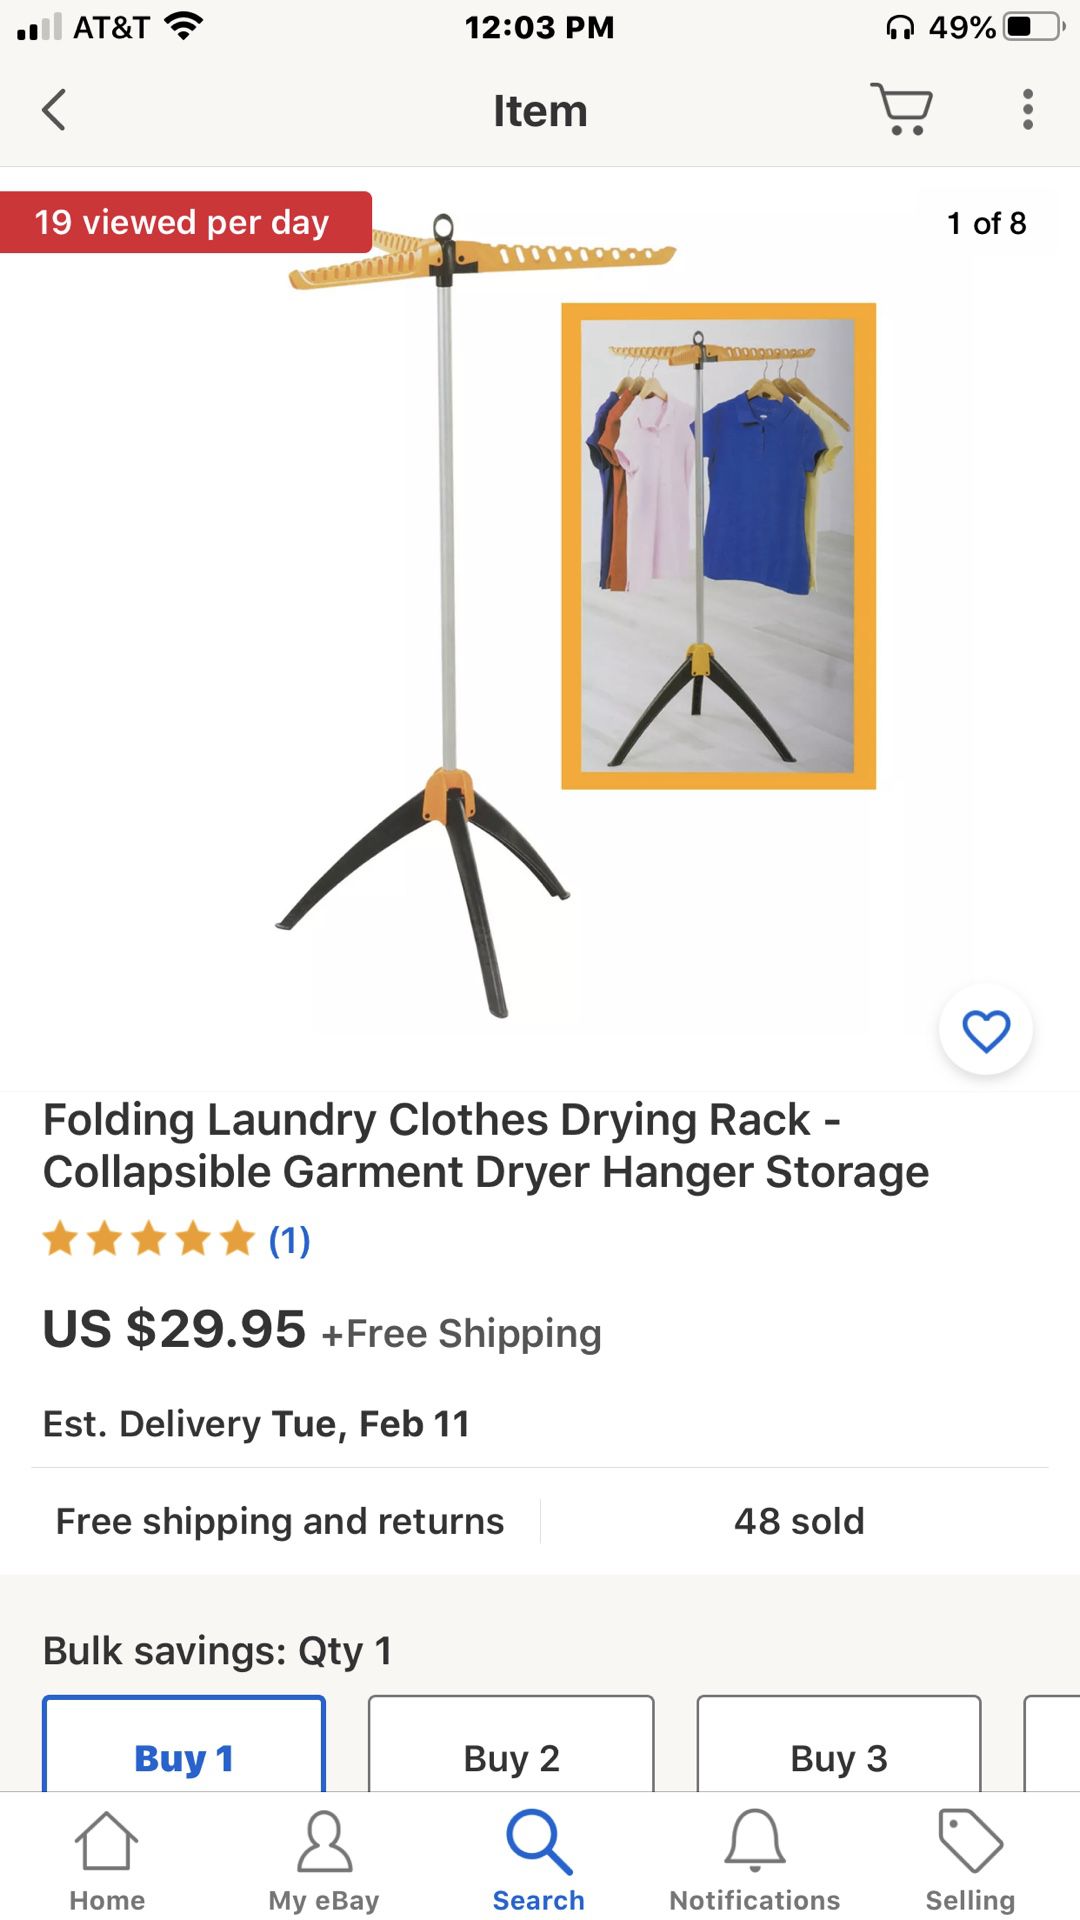 Folding Laundry Clothes Drying Rack - Collapsible Garment Dryer Hanger Storage